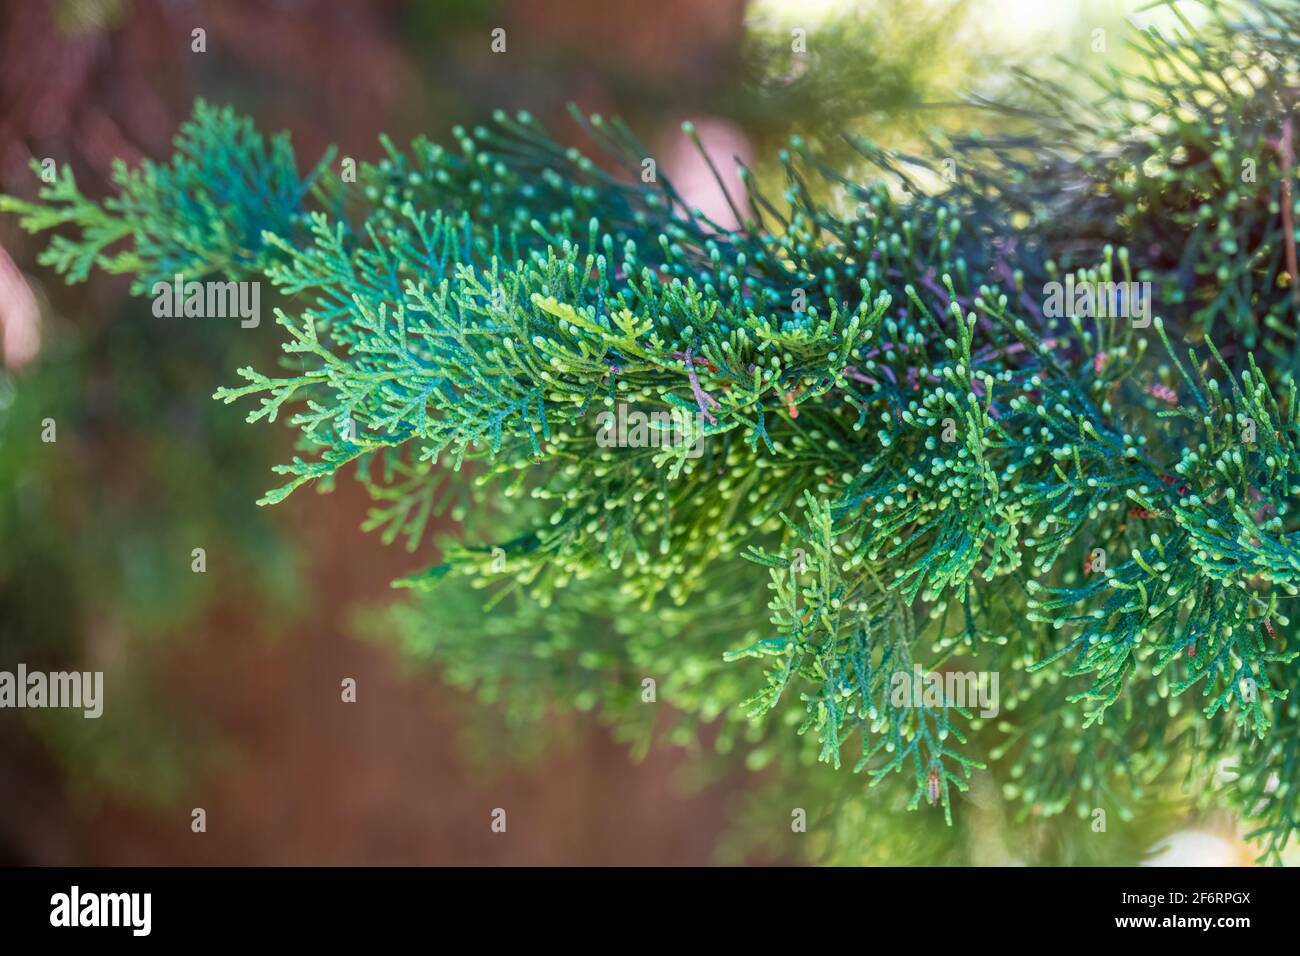 Juniper green branch close up on blurred background. Juniperus excelsa, commonly called the Greek juniper, Stock Photo